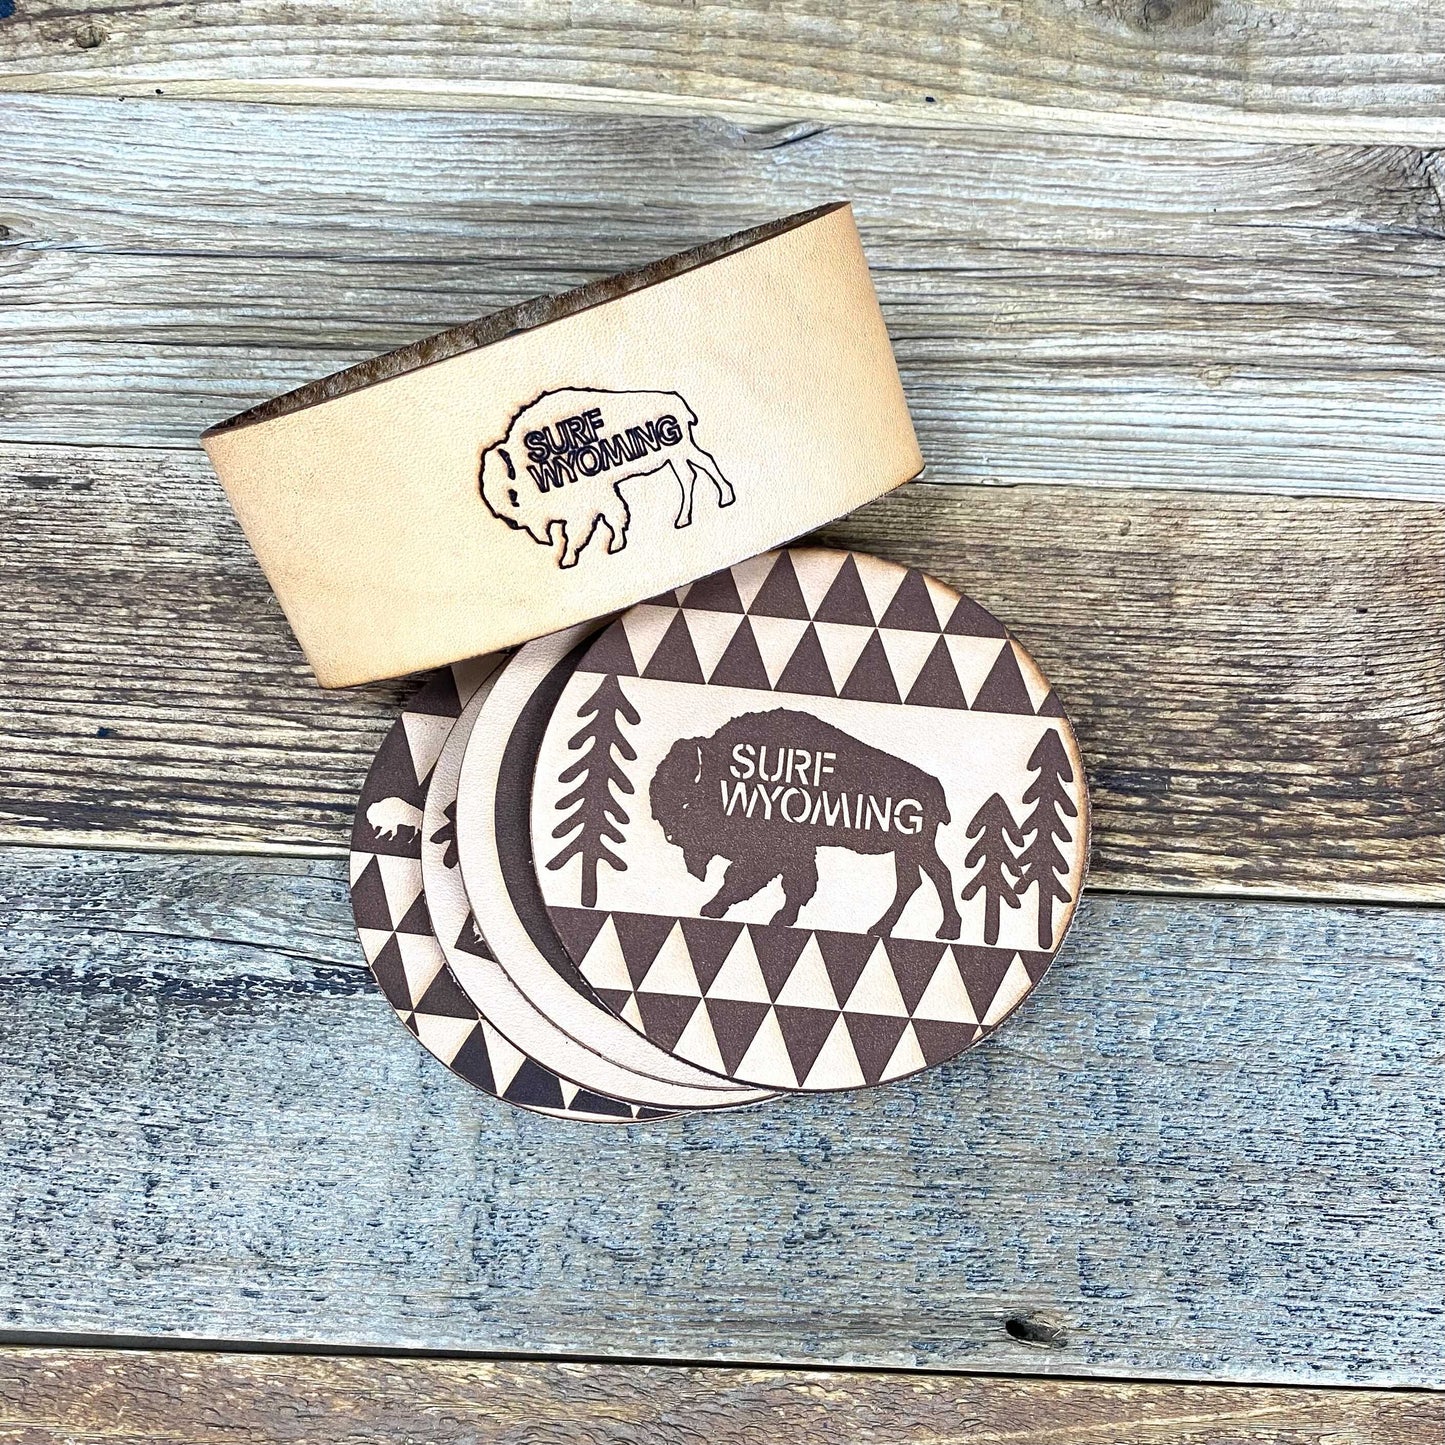 Surf Wyoming® Leather Coasters - Set of 4